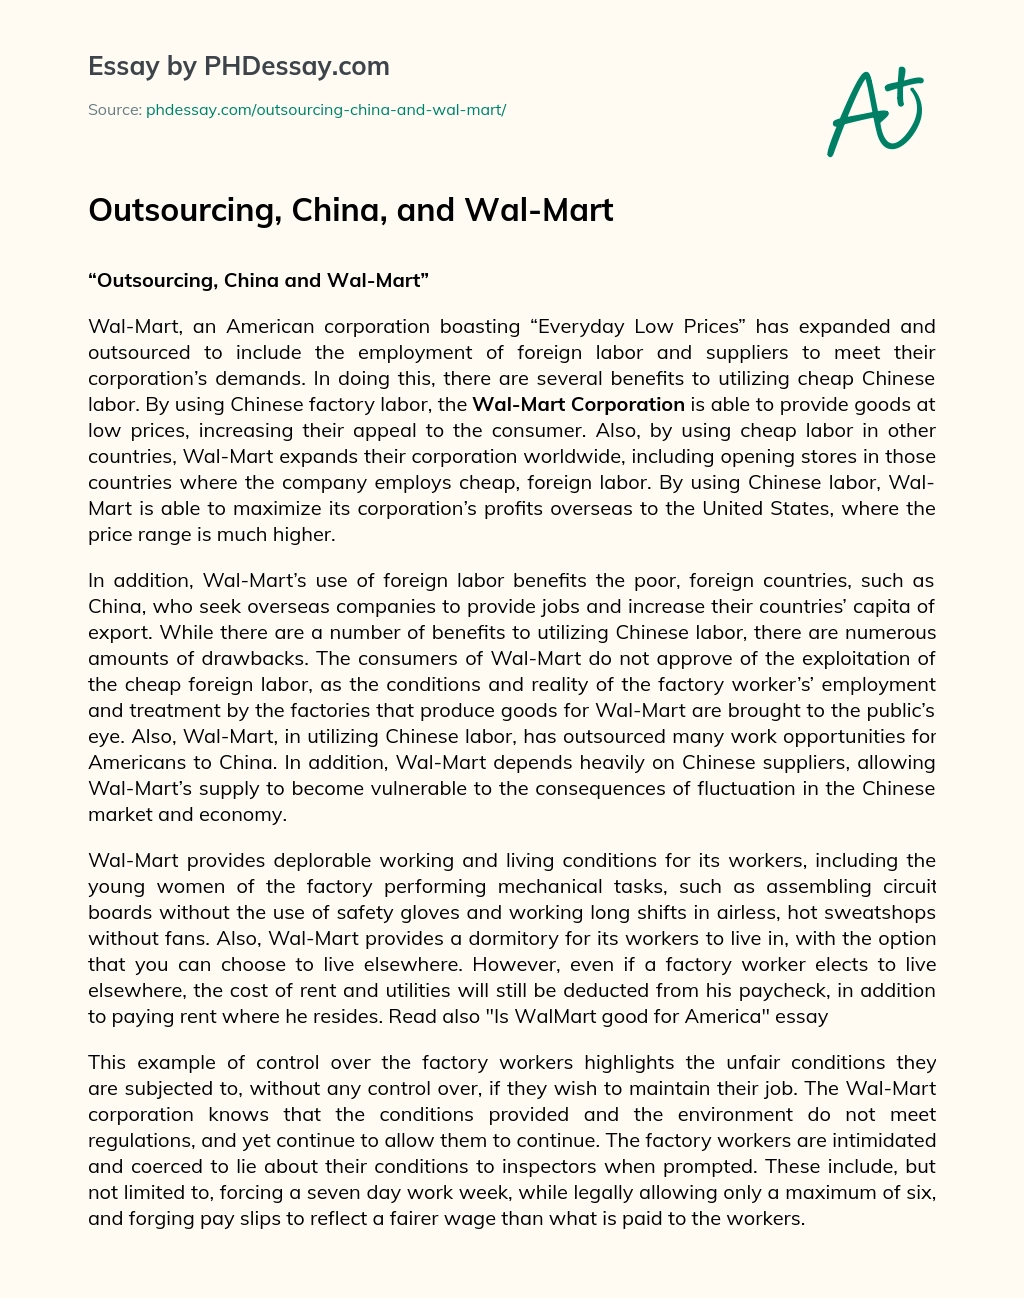 Outsourcing, China, and Wal-Mart essay